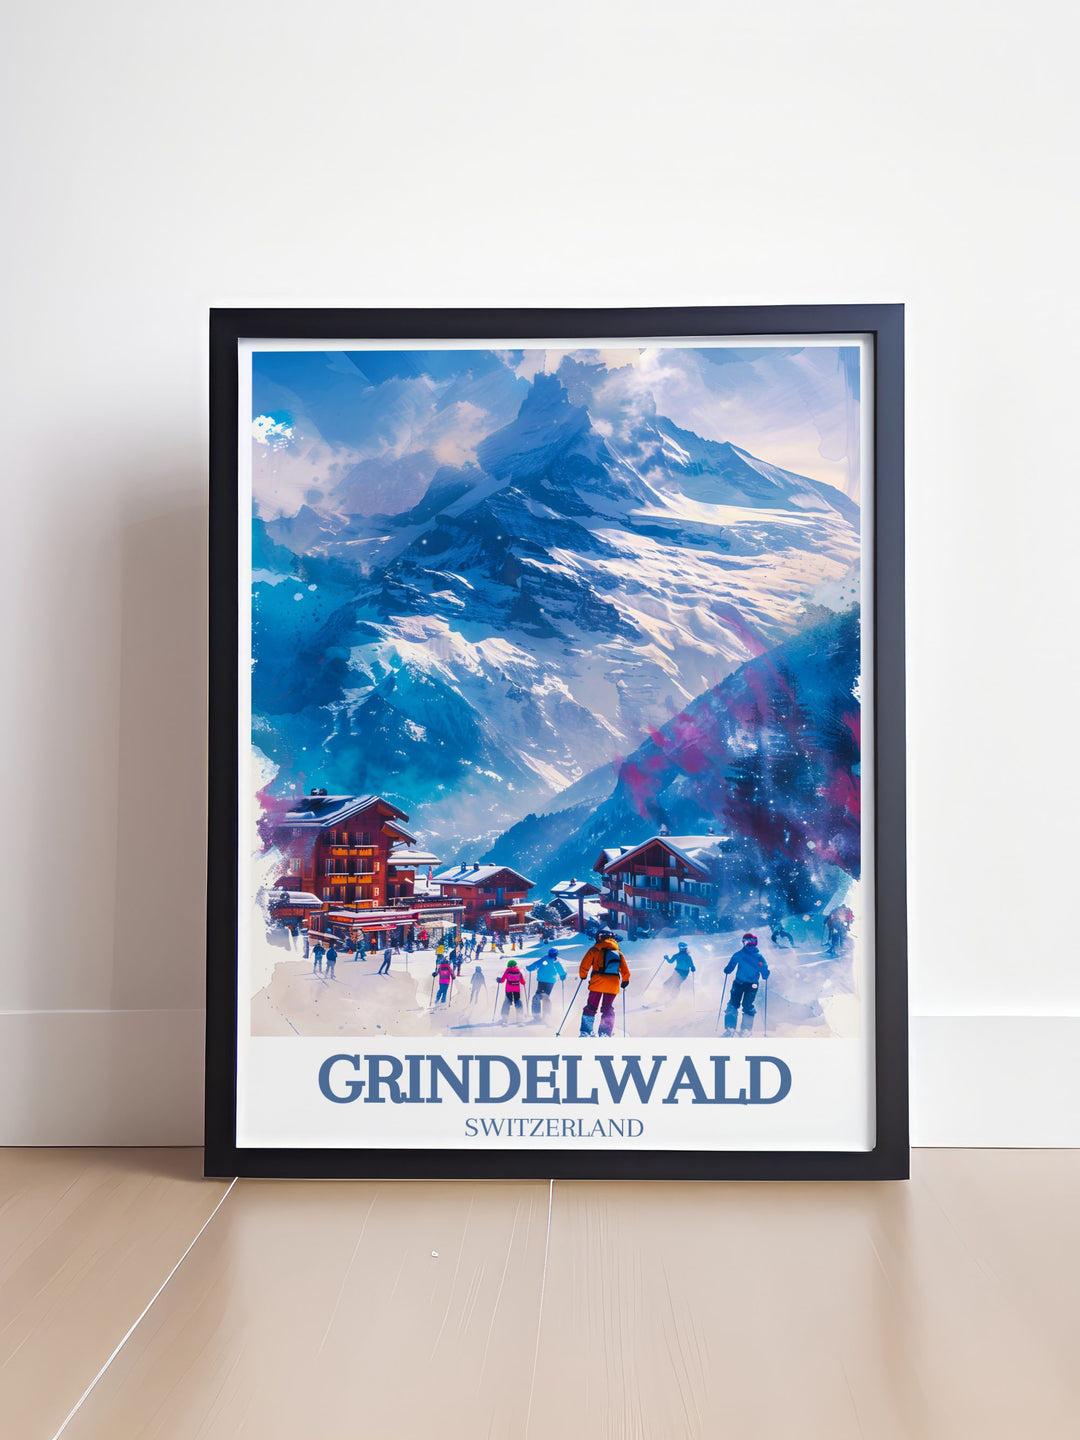 This detailed travel poster of Grindelwald showcases the stunning landscapes and serene atmosphere of the Swiss Alps, perfect for adding a touch of alpine beauty to your home decor.